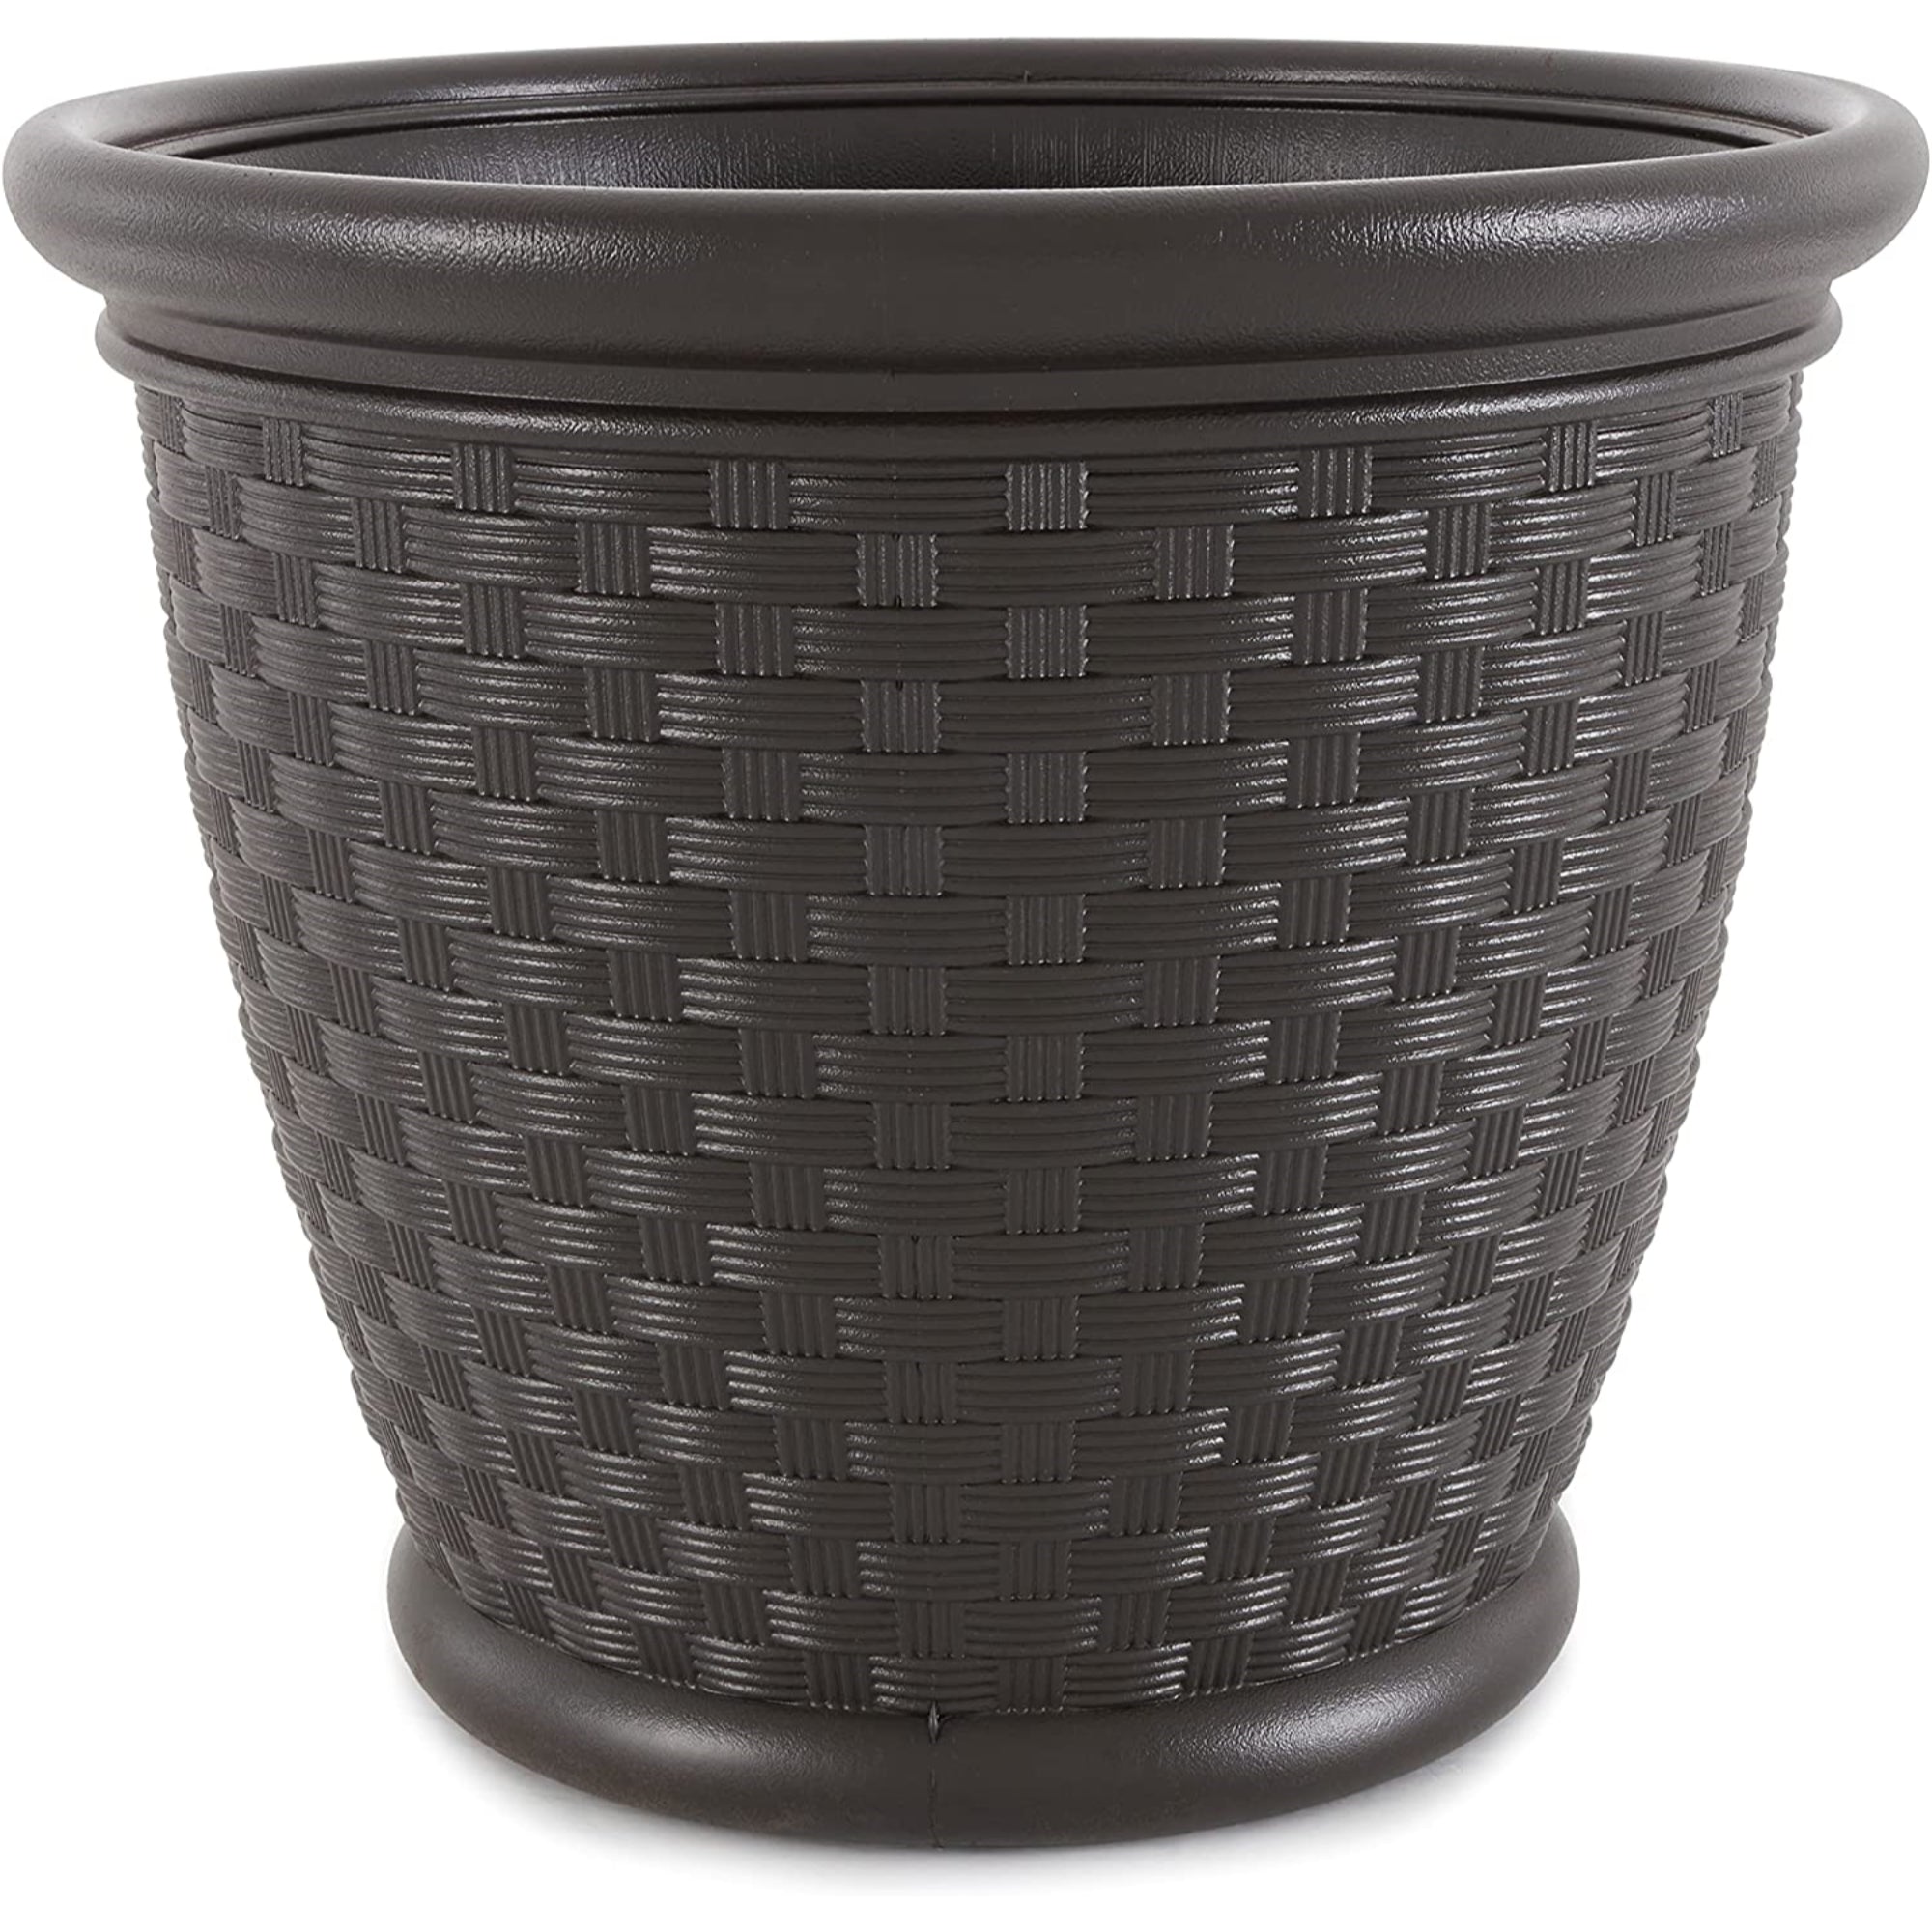 Suncast Sonora Resin Wicker Planter Contemporary Lightweight Flower Pot for Indoor and Outdoor Use, Java, 18"